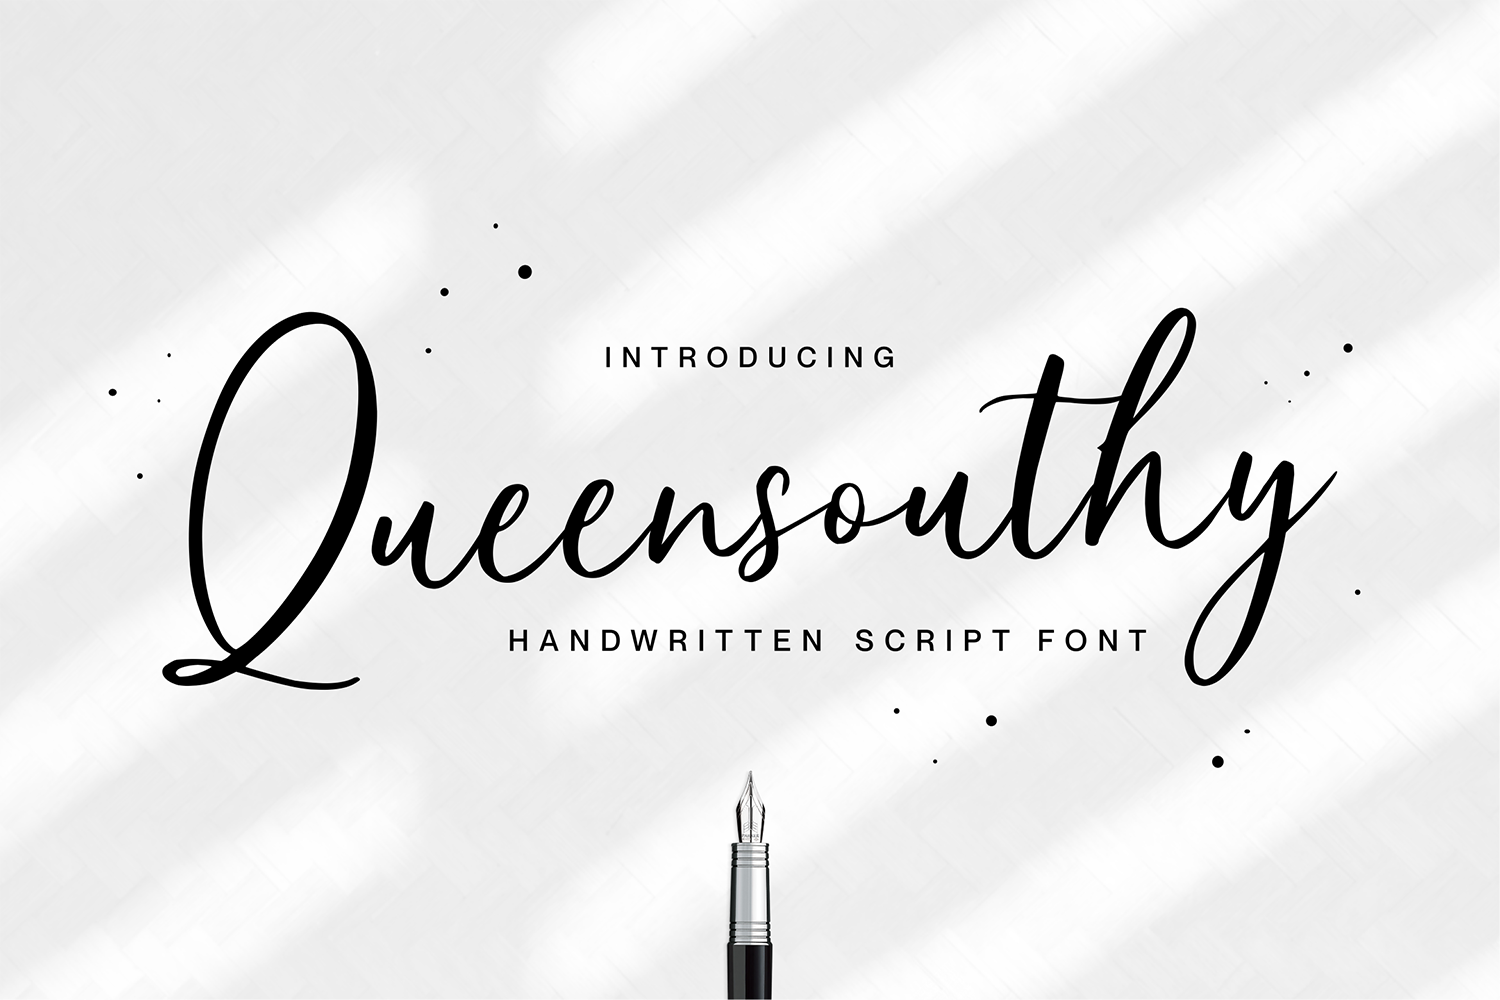 Queensouthy Free Font